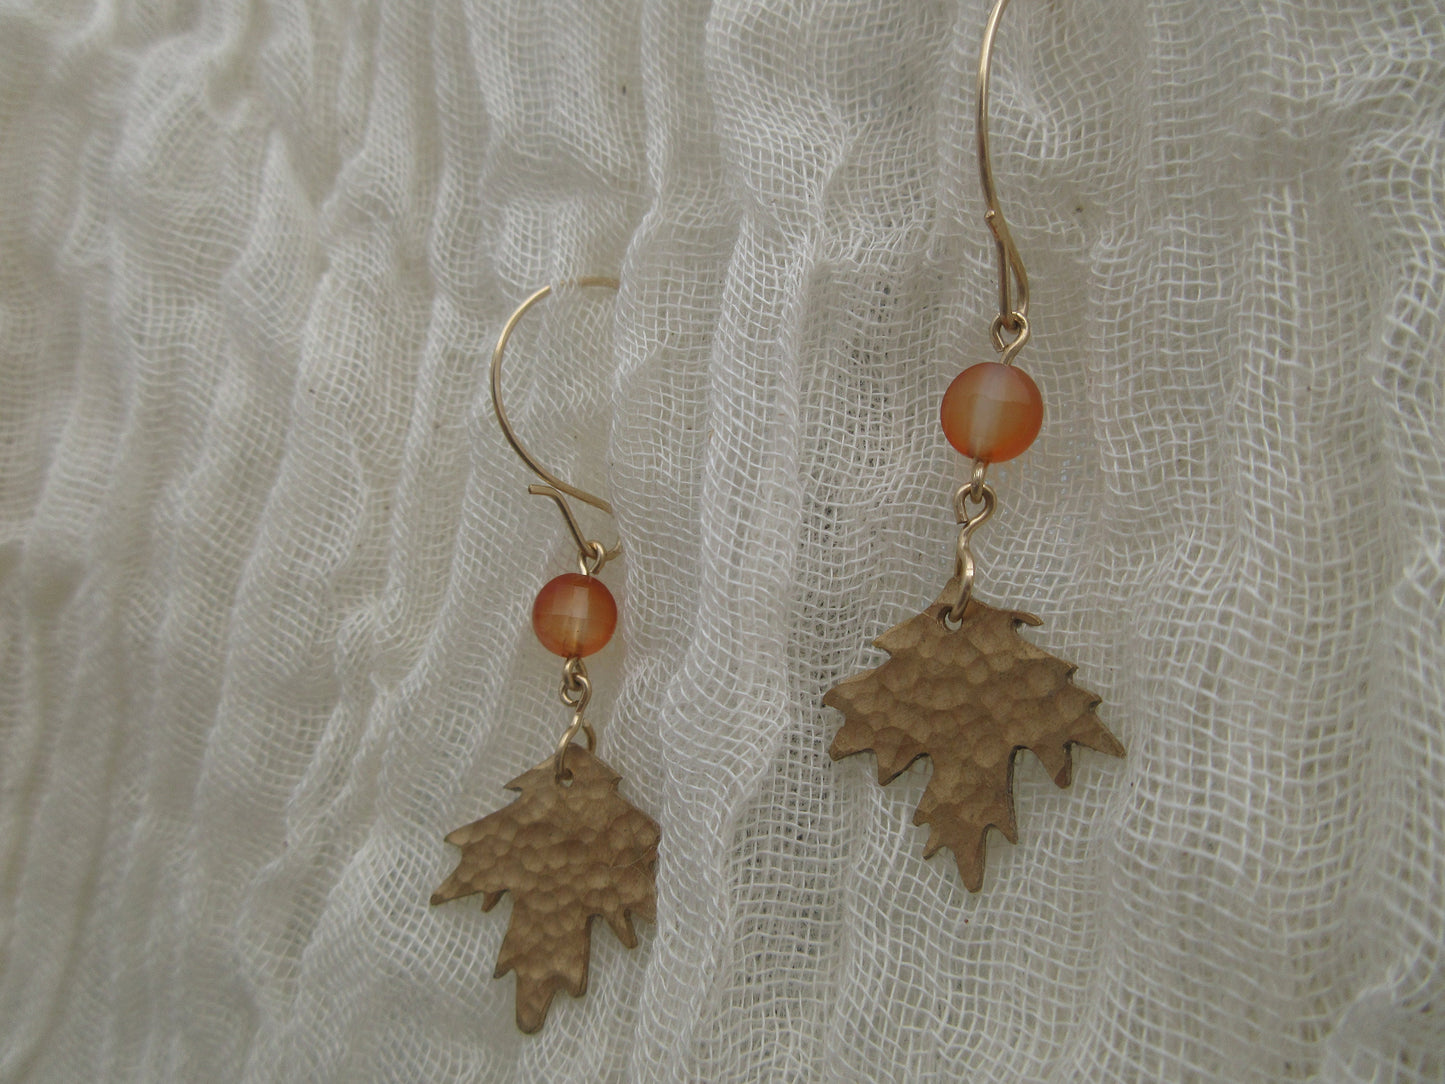 Sugar maple leaf earrings with carnelian, NuGold, and gold-filled wires